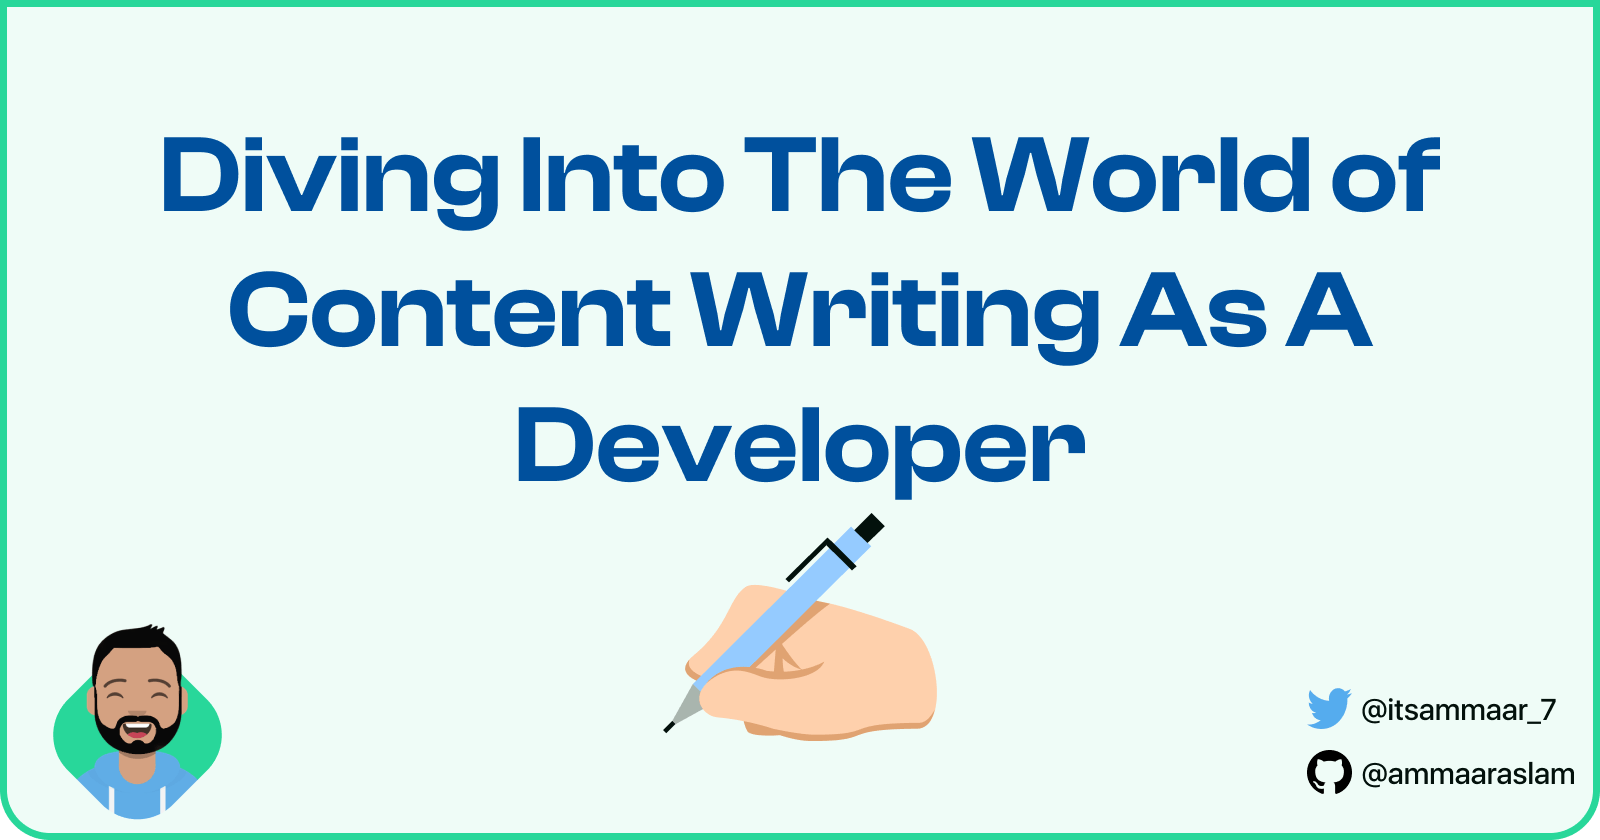 Diving Into The World of Content Writing As A Developer